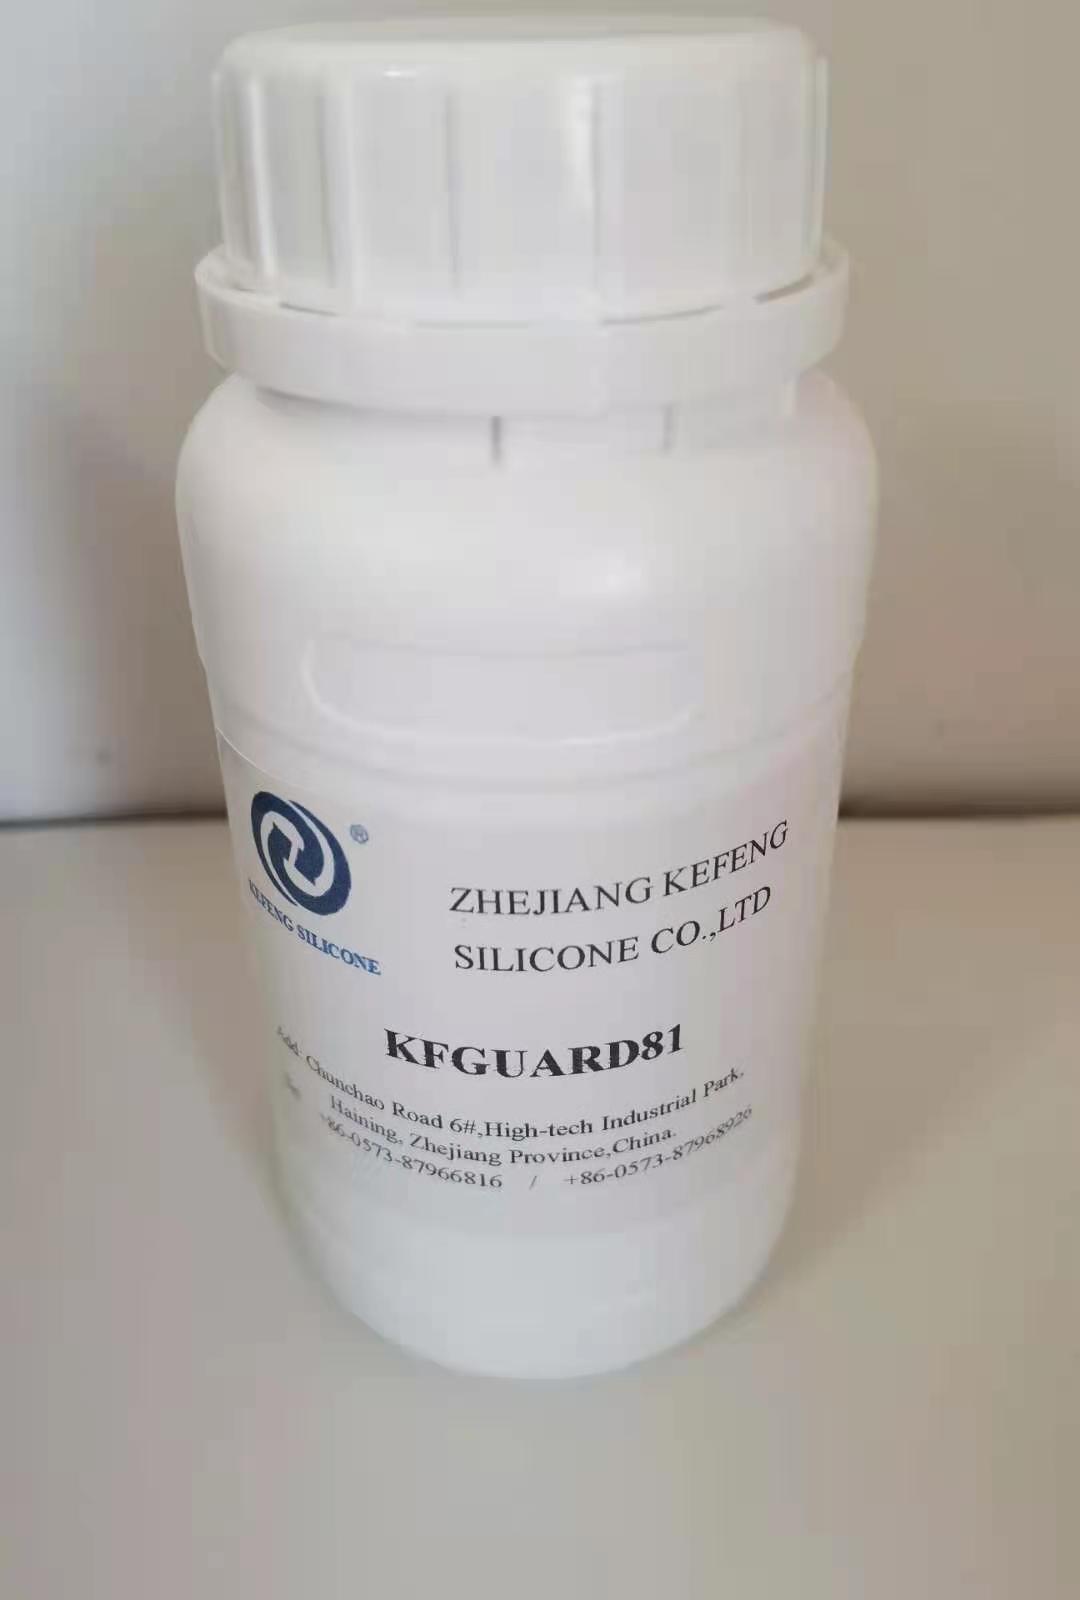 Why Buy Silicone Oil?